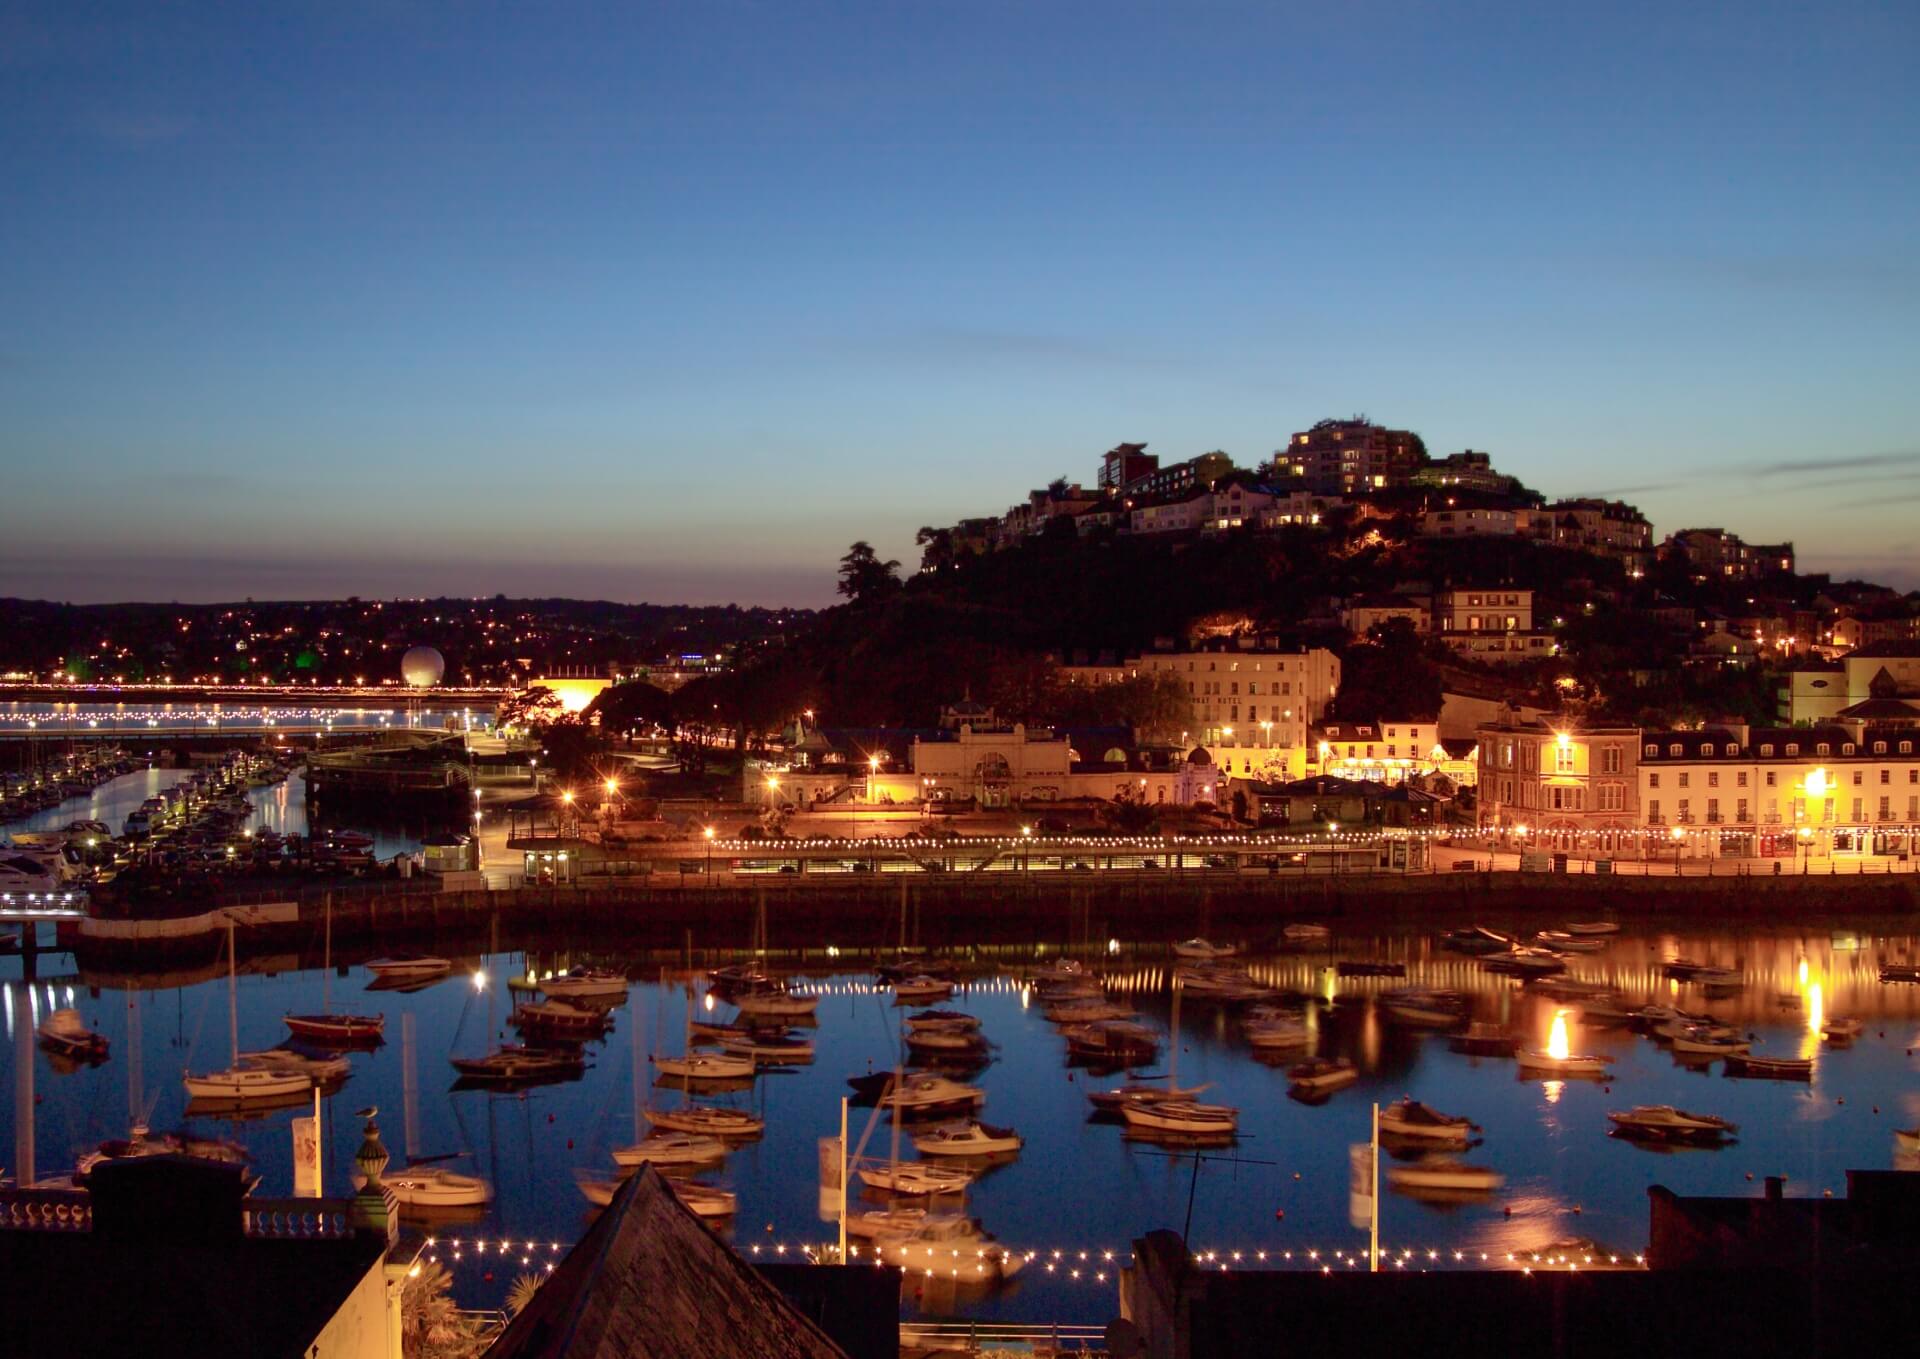 Torquay on The English Riviera - self catering holidays.